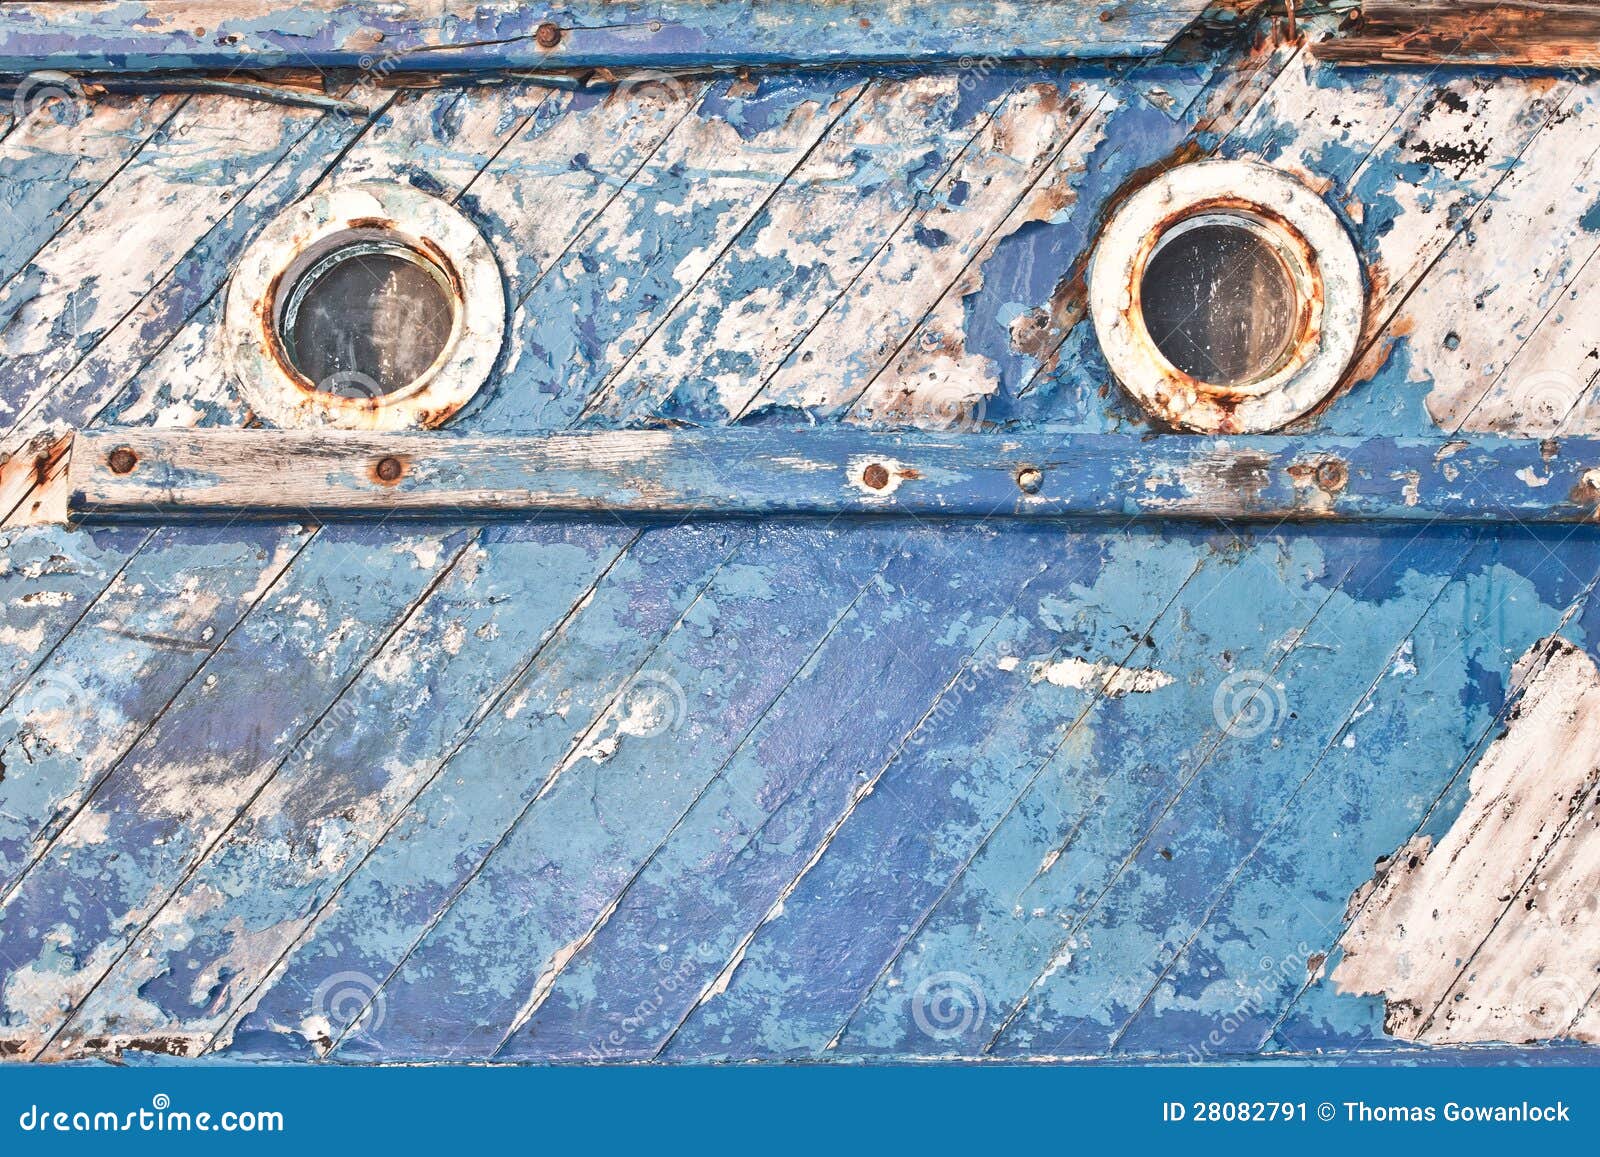 Close up of the portholes on the side of an old fishing boat.